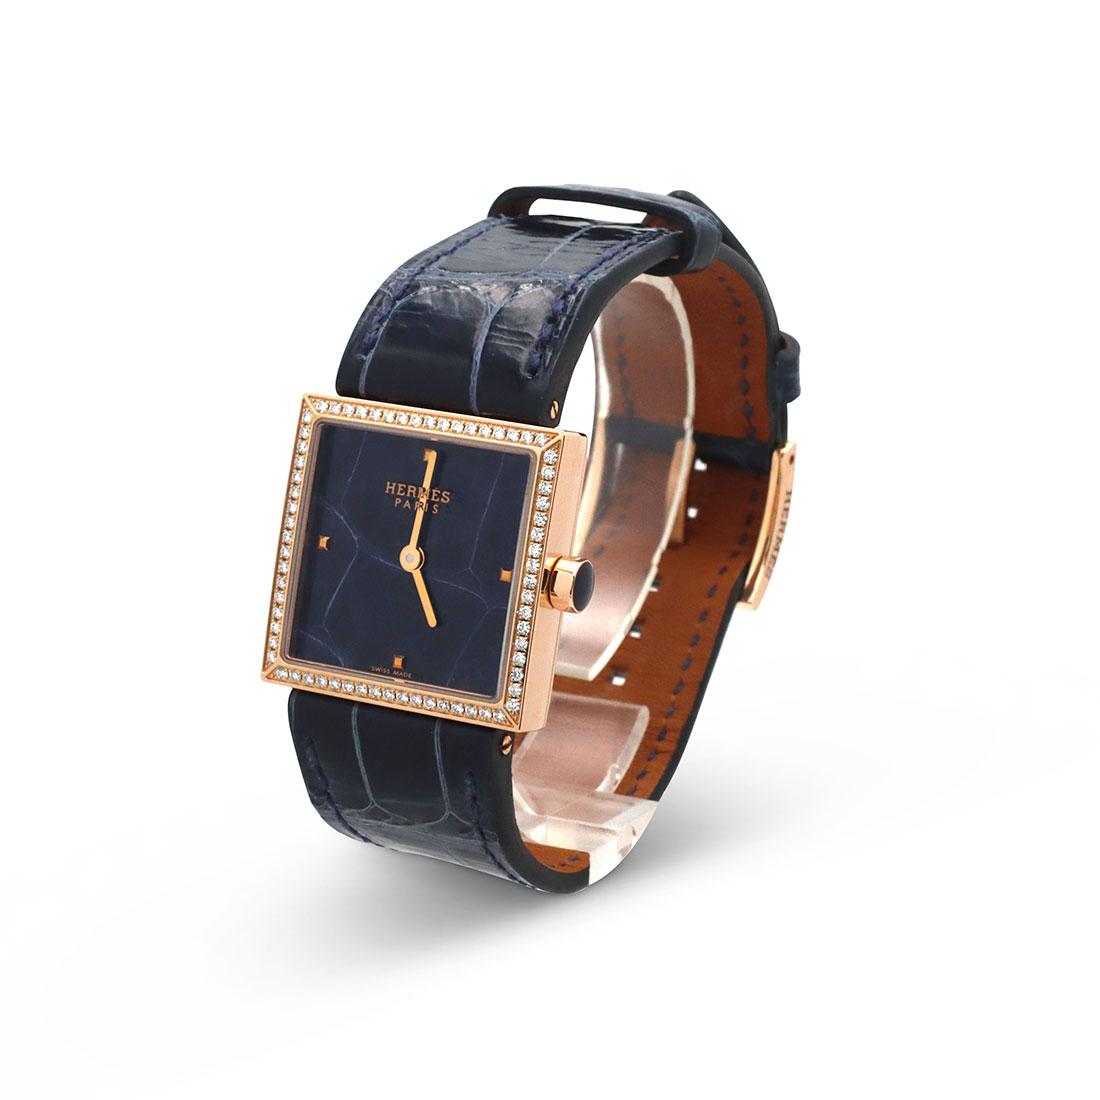 Authentic Hermès 'Carré Cuir' ladies watch crafted in 18 karat rose gold.  The square case measures 24mm x 24mm and the bezel is set with round brilliant cut diamonds.  The unique dial mirrors the blue alligator skin strap.  Swiss quartz movement. 